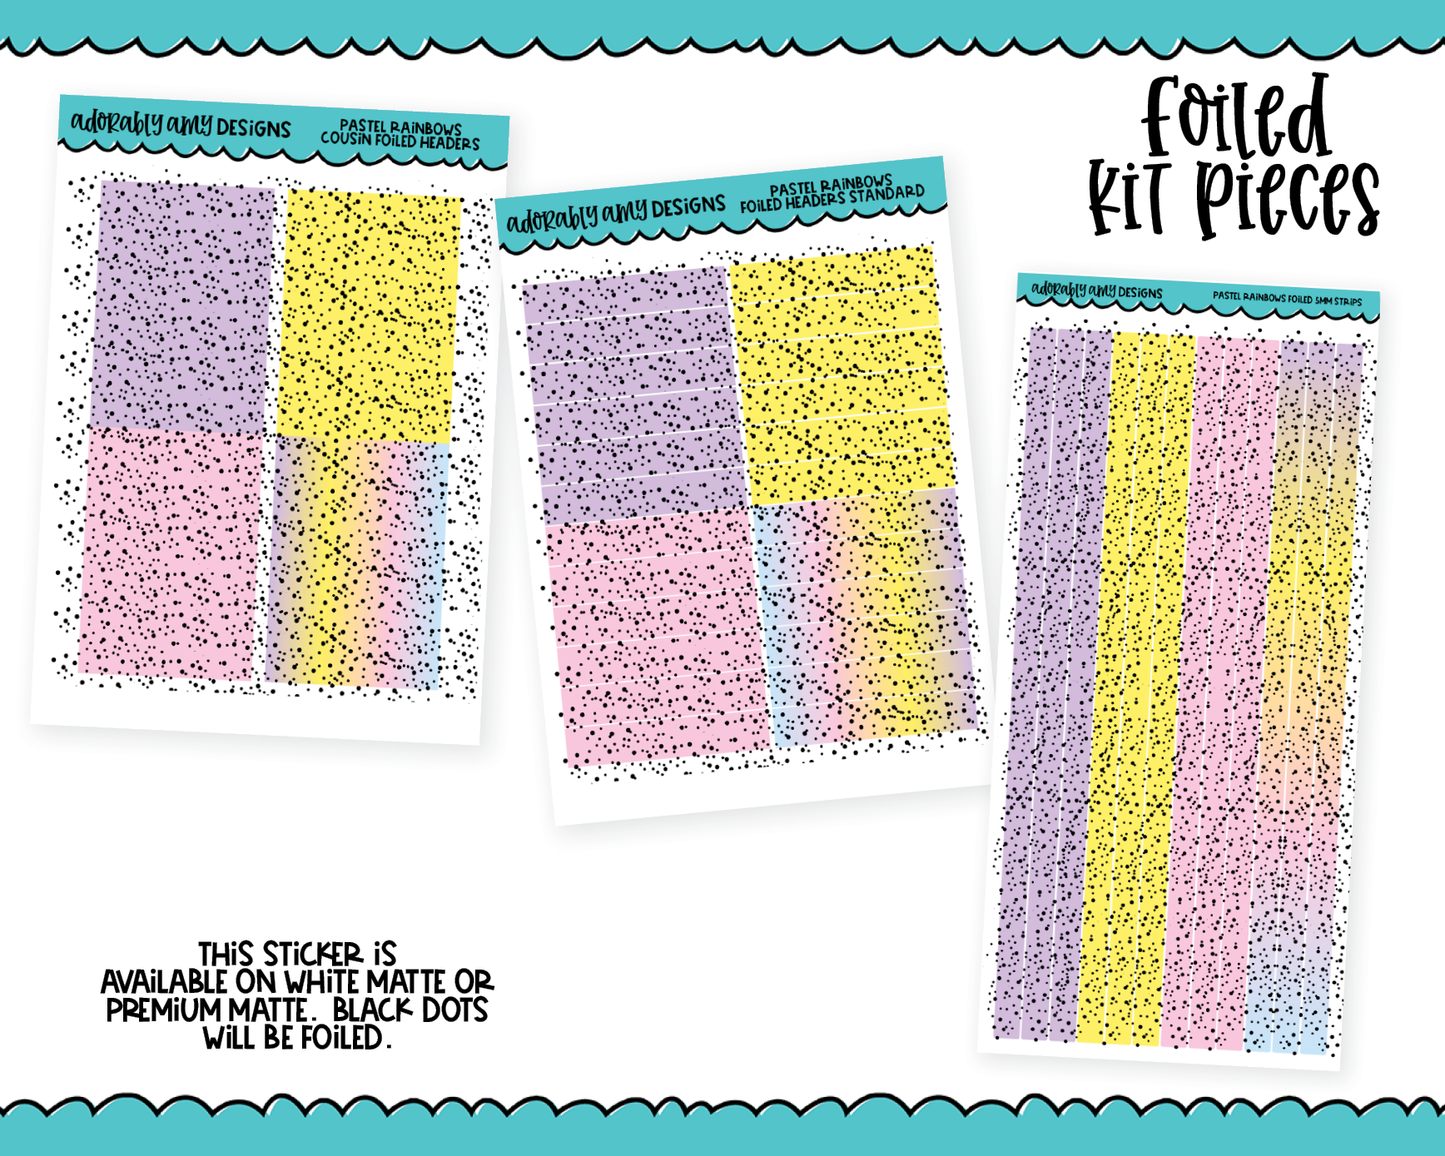 Foiled Pastel Rainbows Headers or Long Strips Planner Stickers for any Planner or Insert